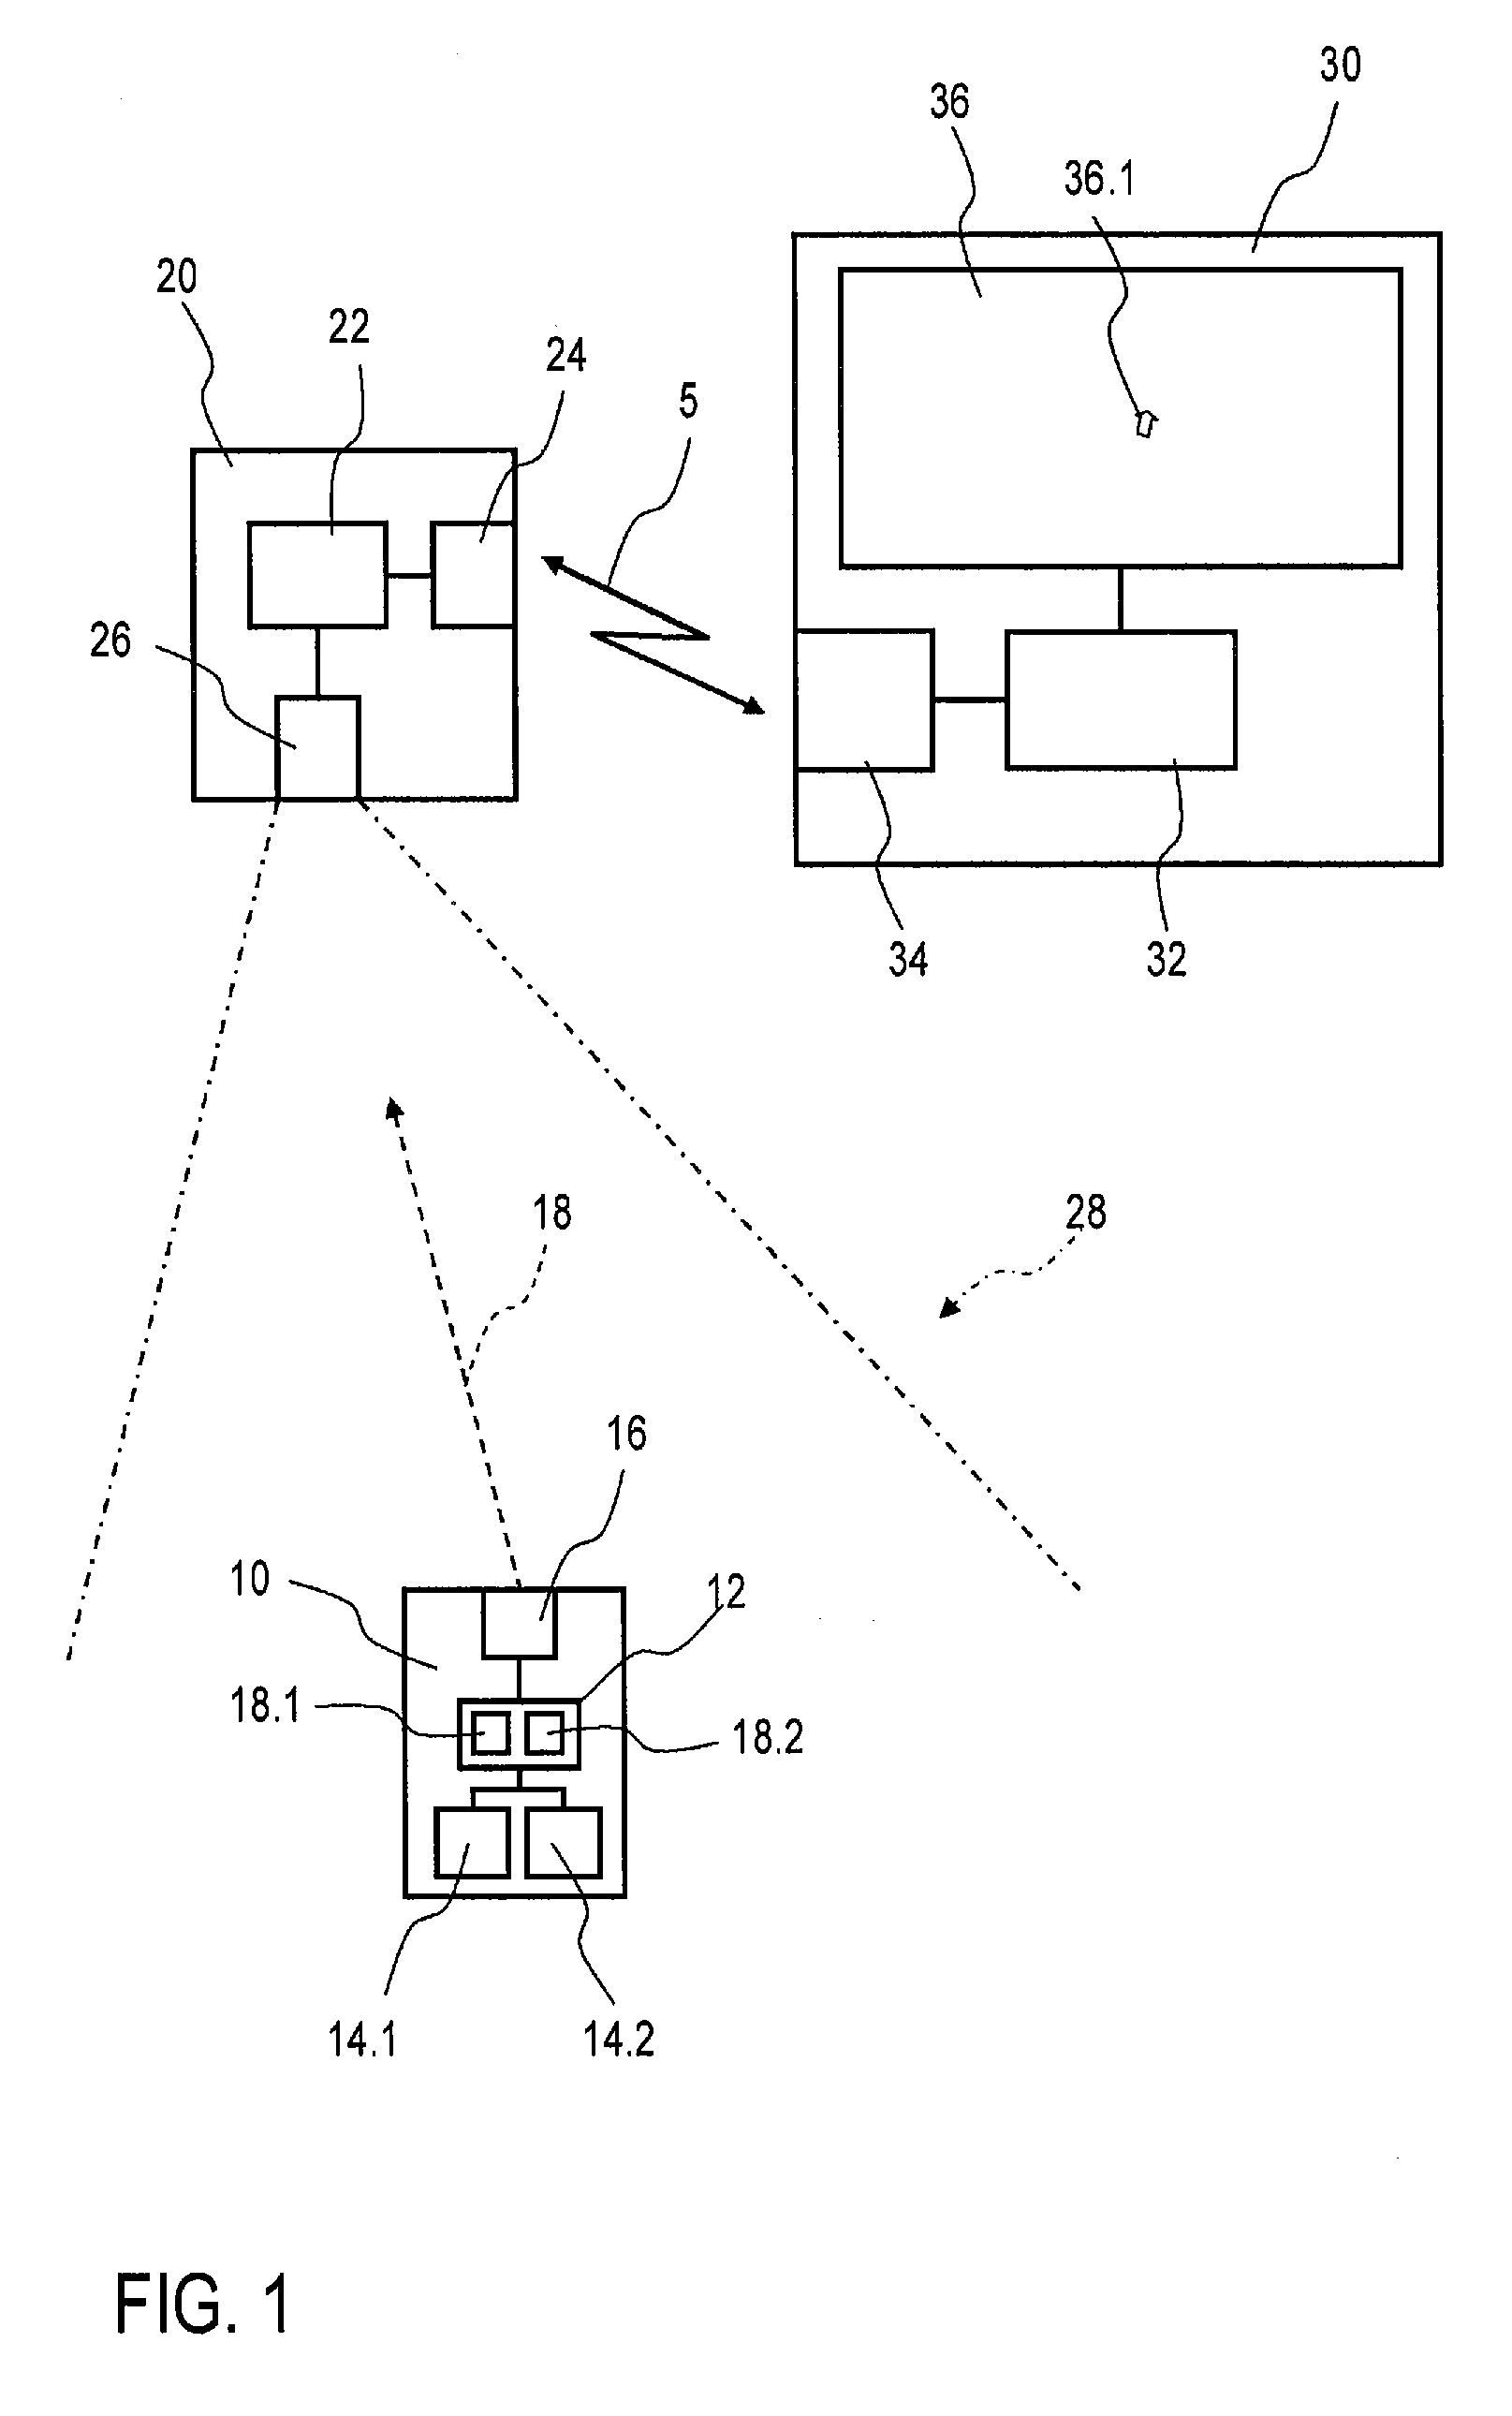 Remote controlling of mouse cursor functions of a computer device